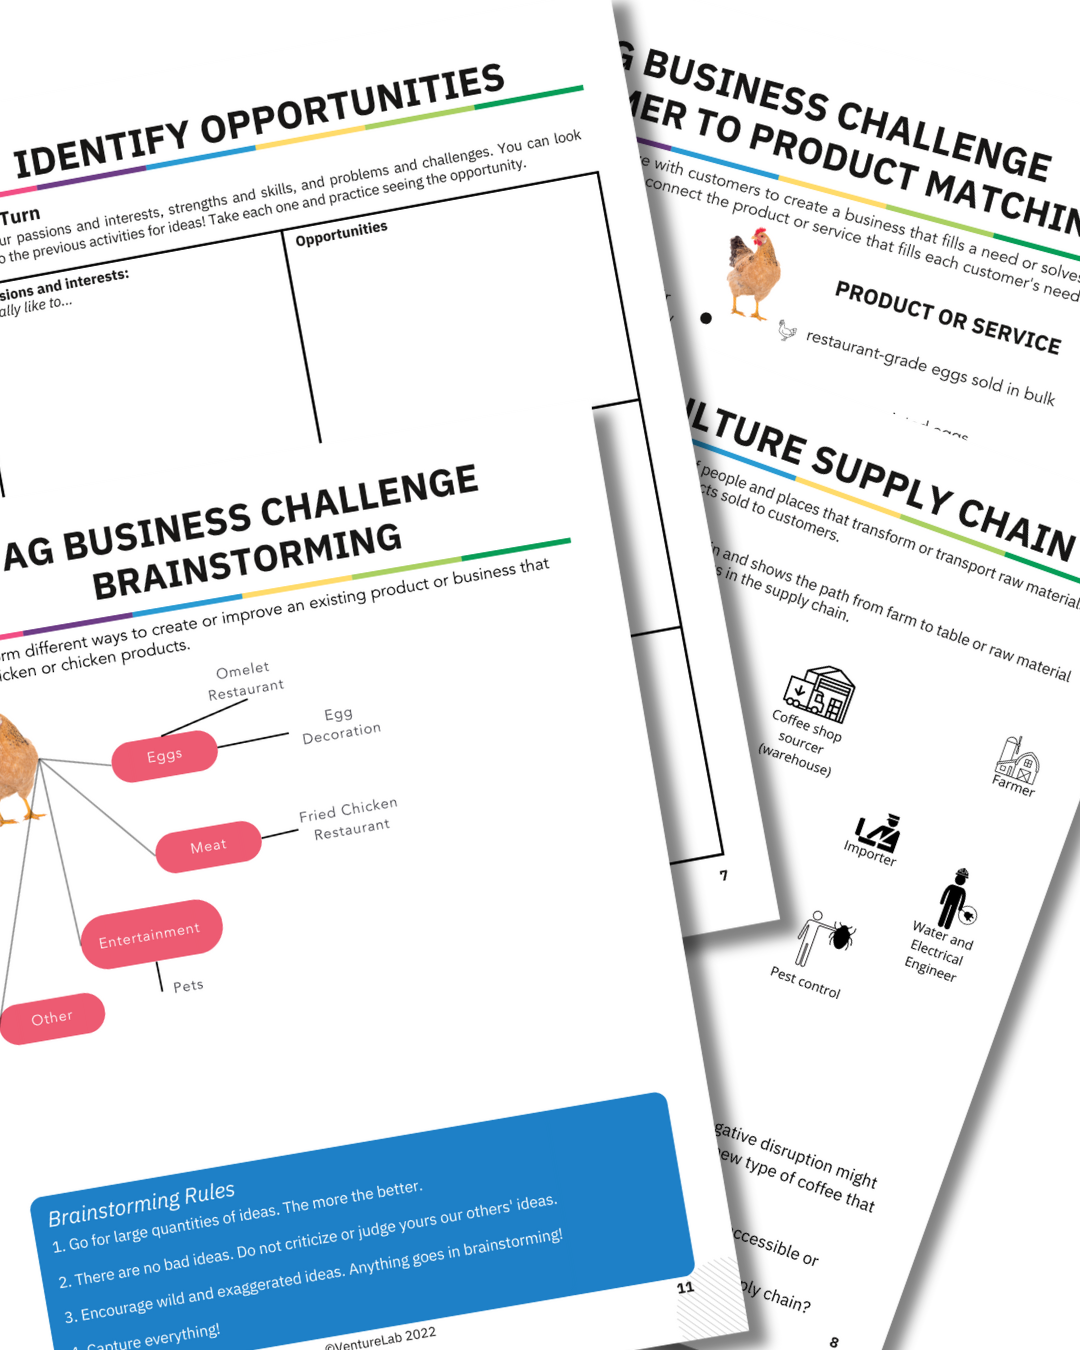 Two business documents displayed side-by-side, focused on brainstorming and agriculture entrepreneurship program, with text and diagrams providing explanations.